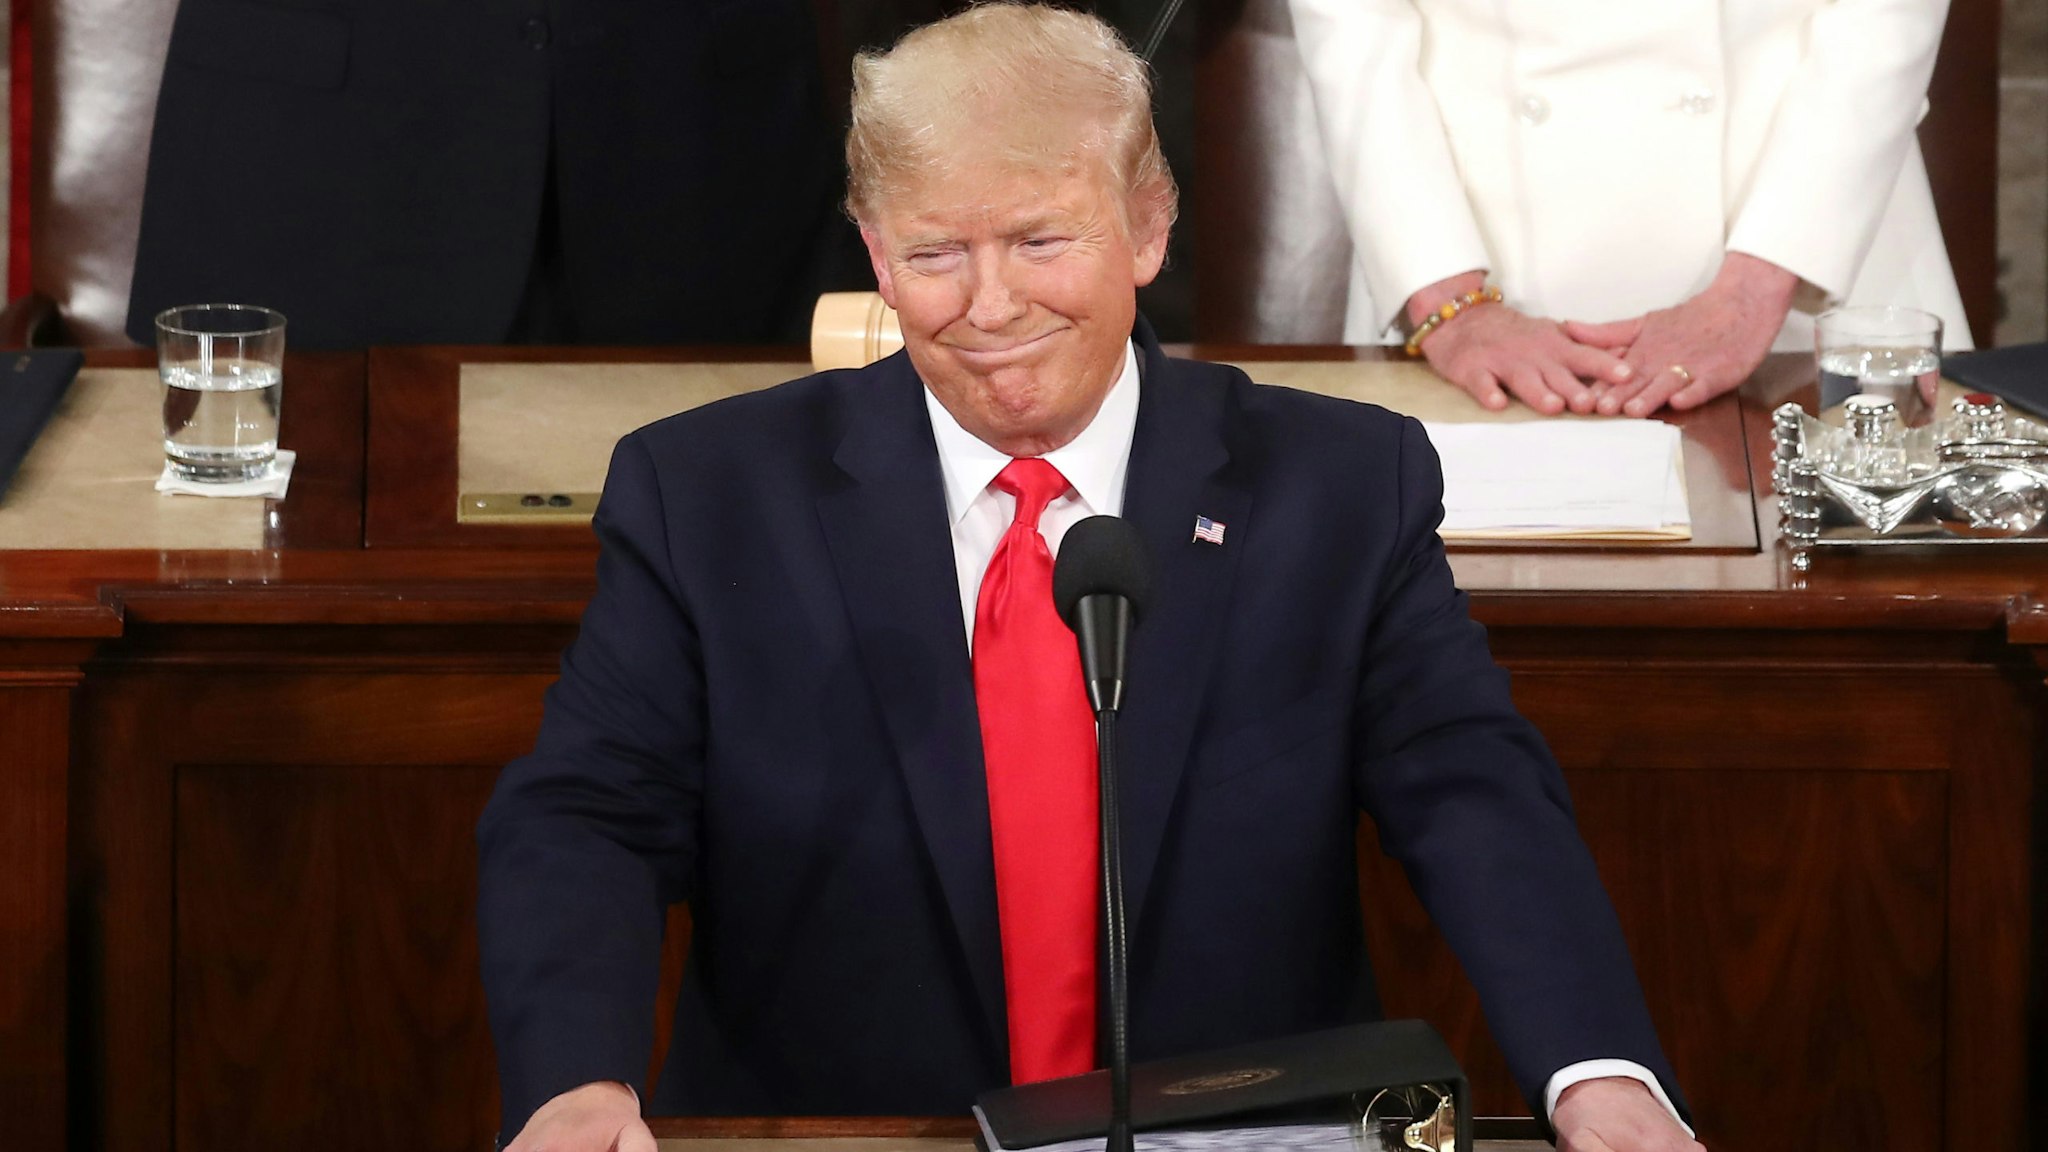 WASHINGTON, DC - FEBRUARY 04: President Donald Trump delivers the State of the Union address in the chamber of the U.S. House of Representatives on February 04, 2020 in Washington, DC. President Trump delivers his third State of the Union to the nation the night before the U.S. Senate is set to vote in his impeachment trial.